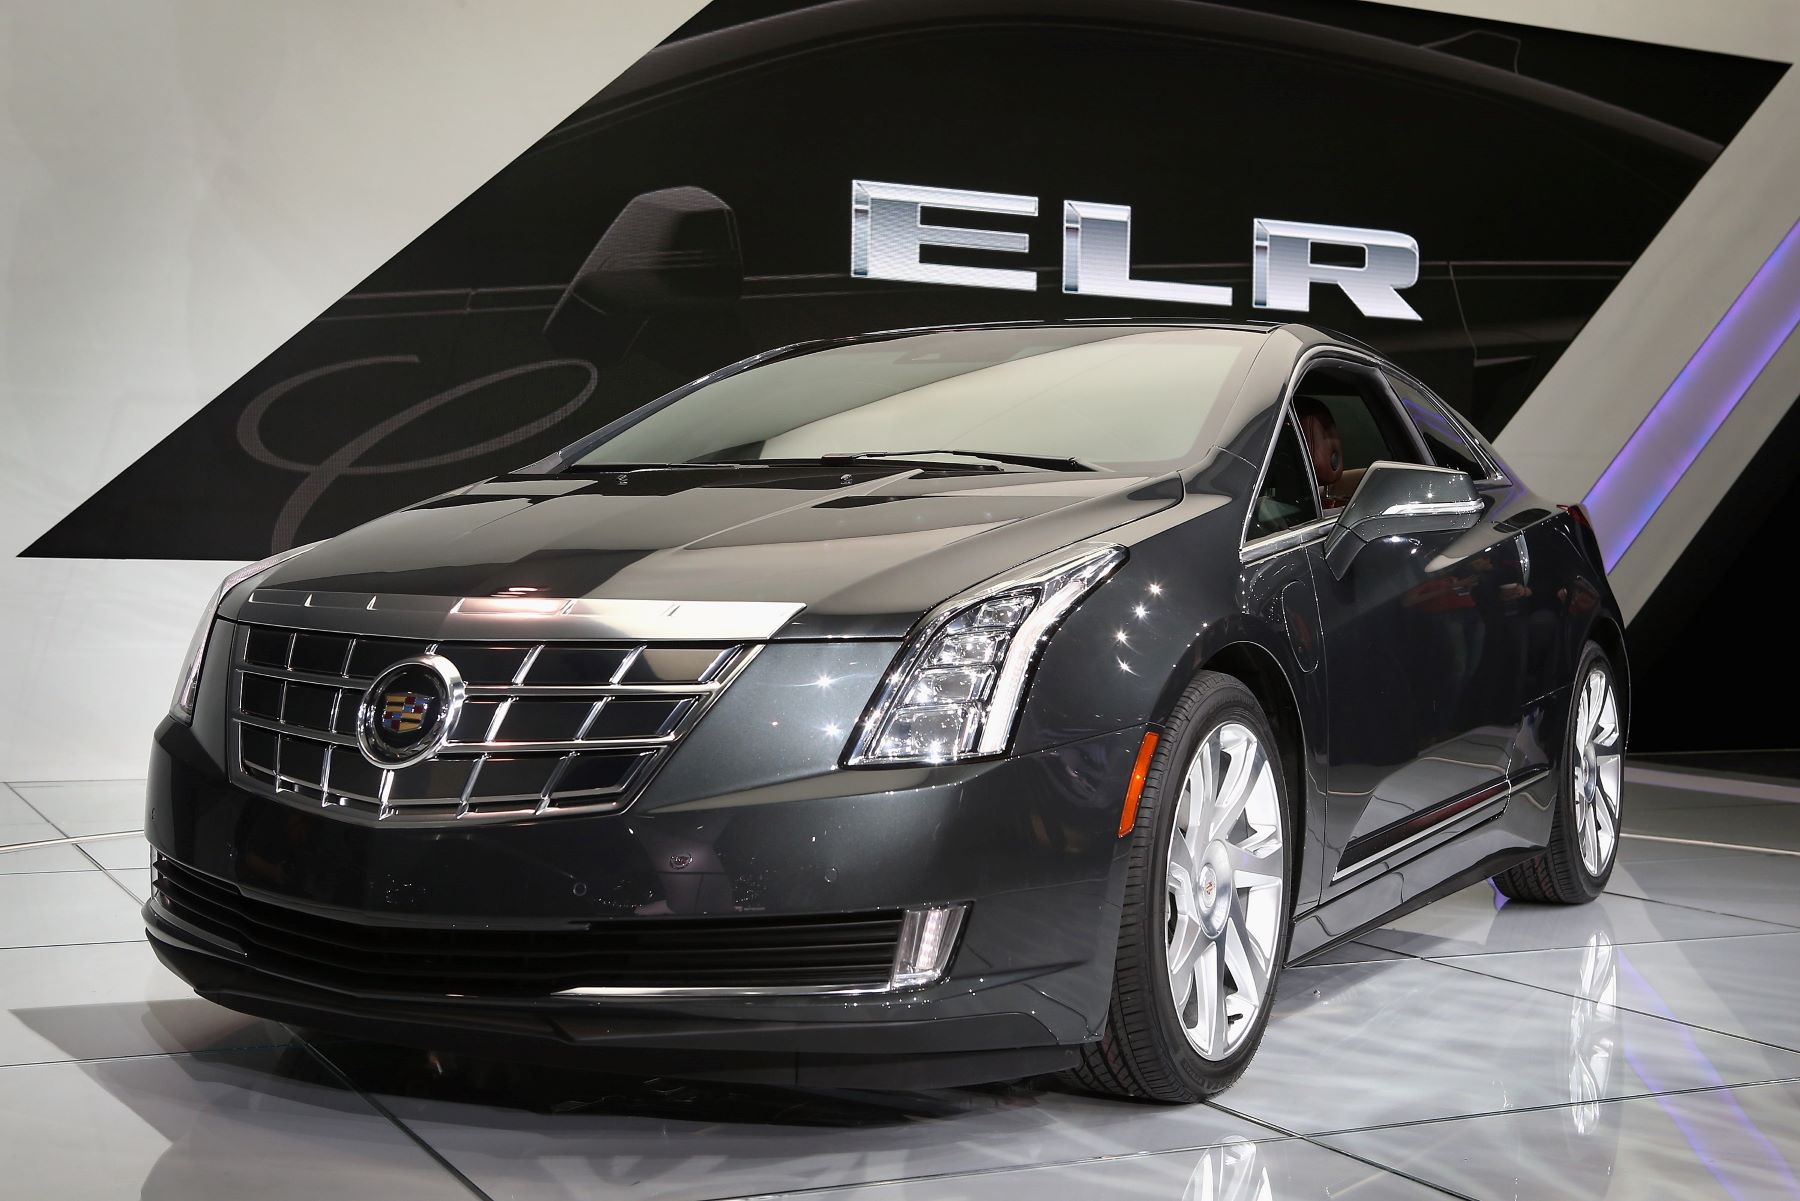 The Cadillac ELR luxury hybrid model at the 2013 North American International Auto Show in Detroit, Michigan